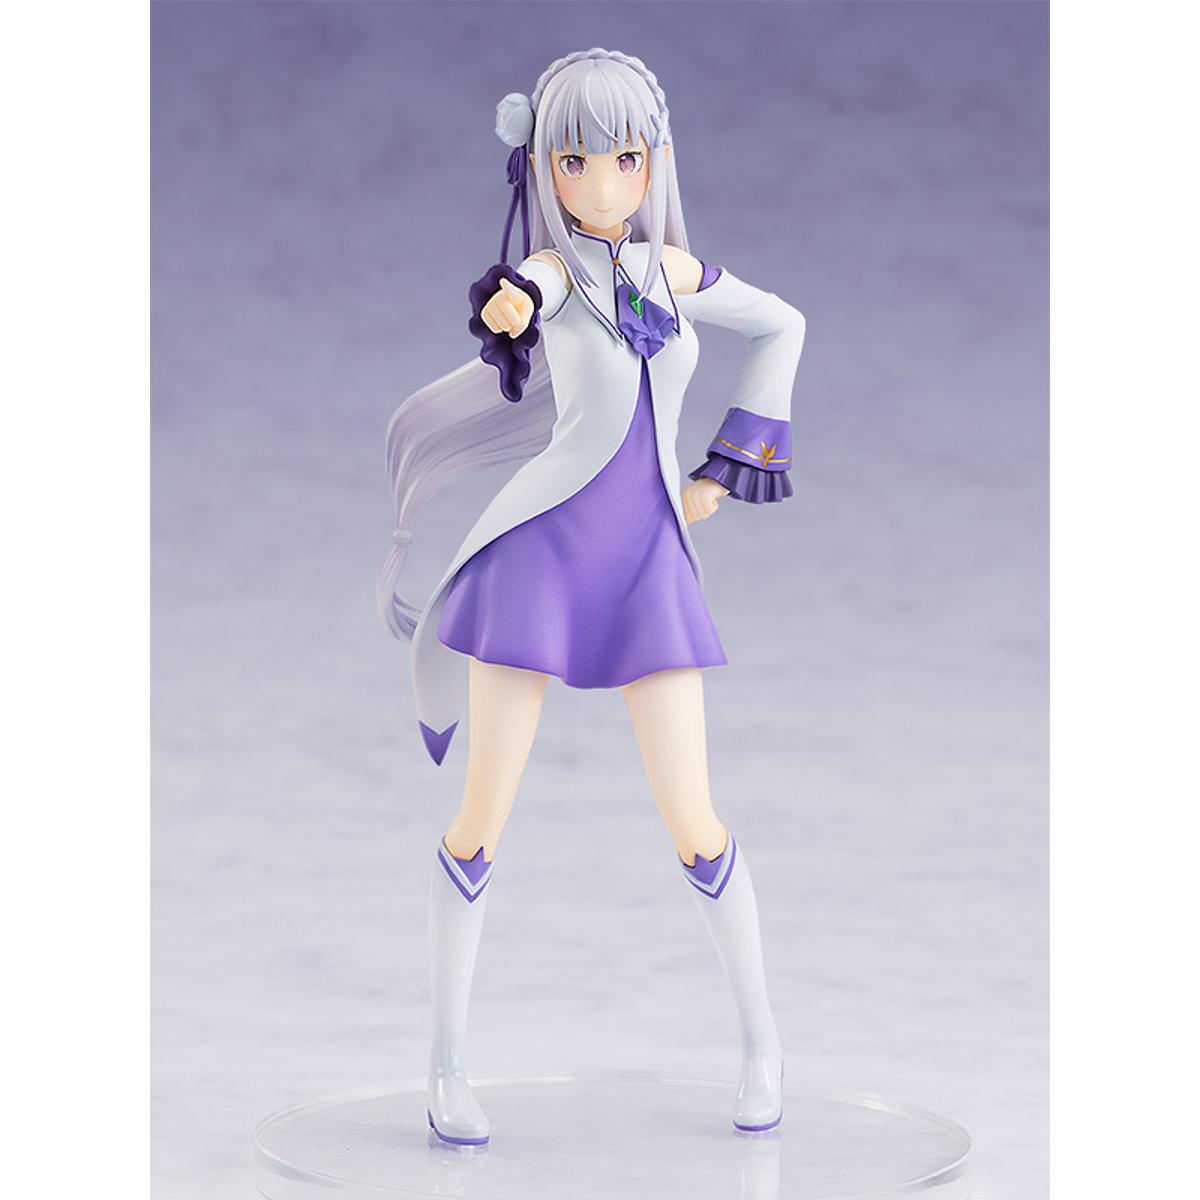 EXQ Figure Re:Zero Emilia Starting Life in Another World